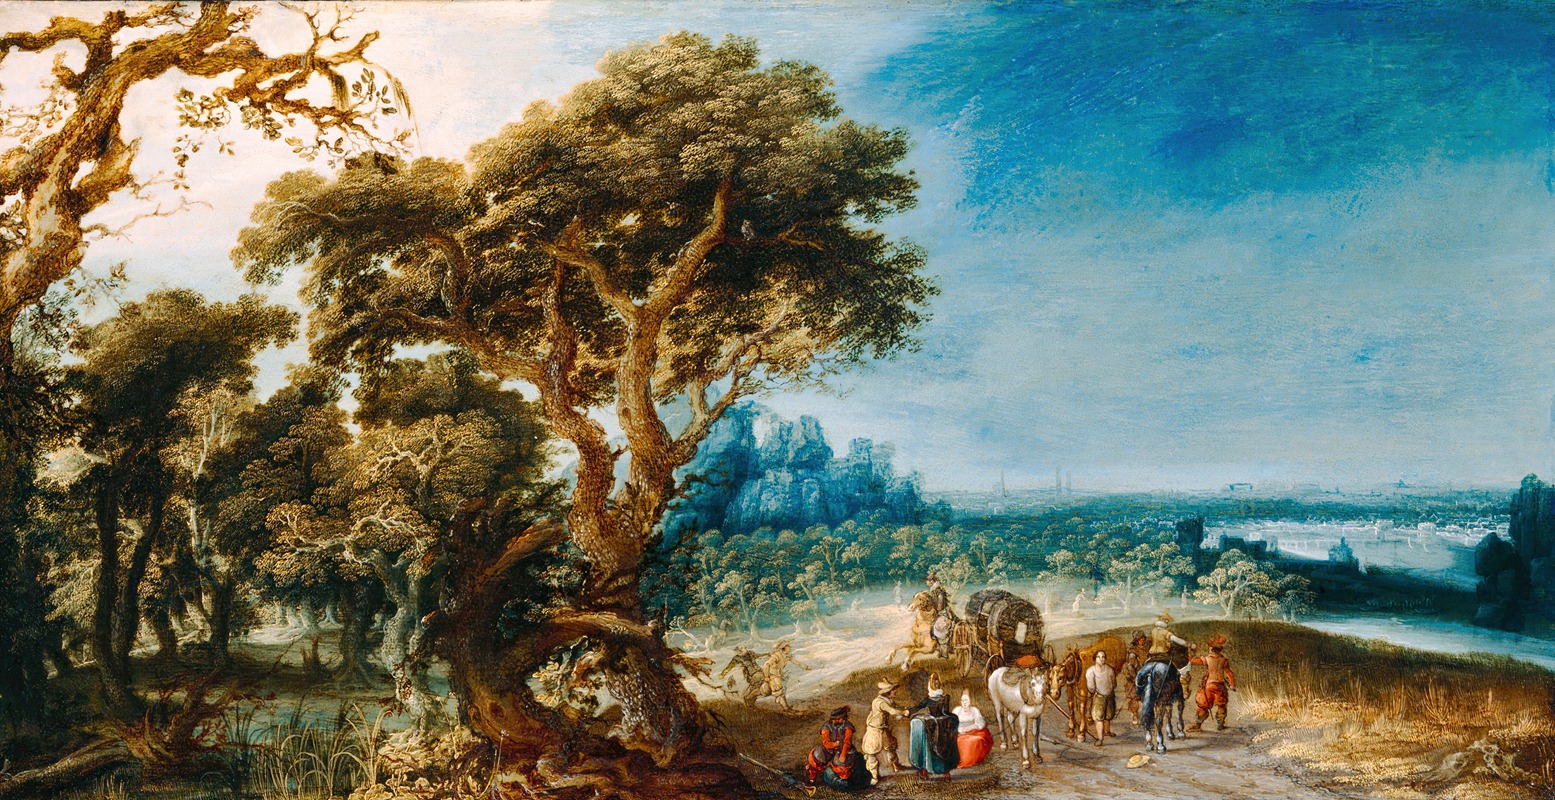 Jacob van Geel - Landscape with a Carriage Hold-Up